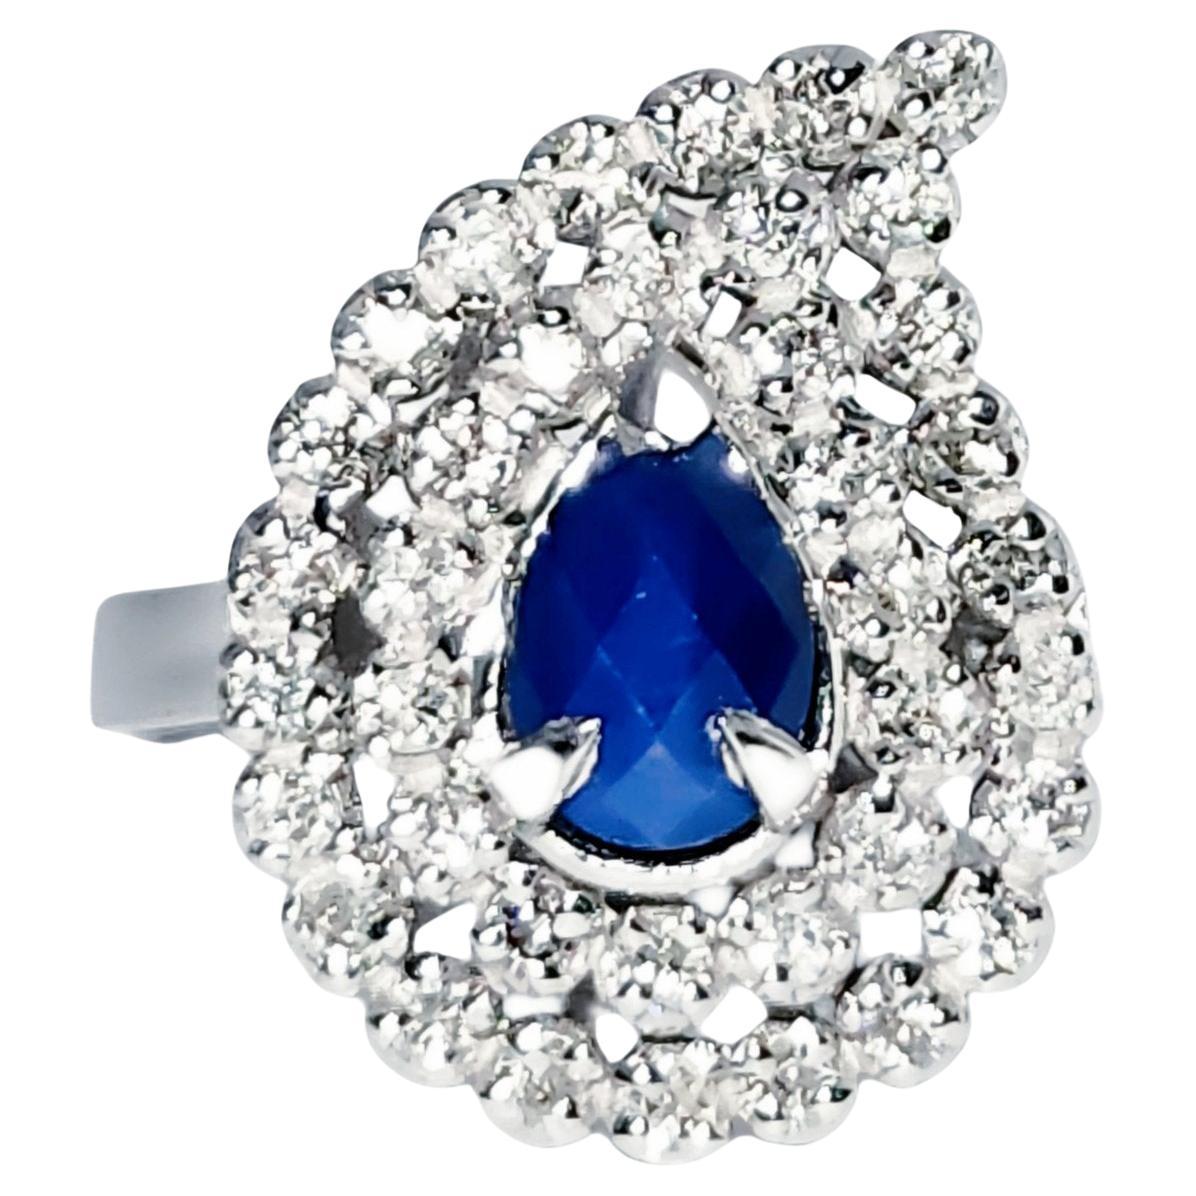 Pear Sapphire Ring 2.46 ct